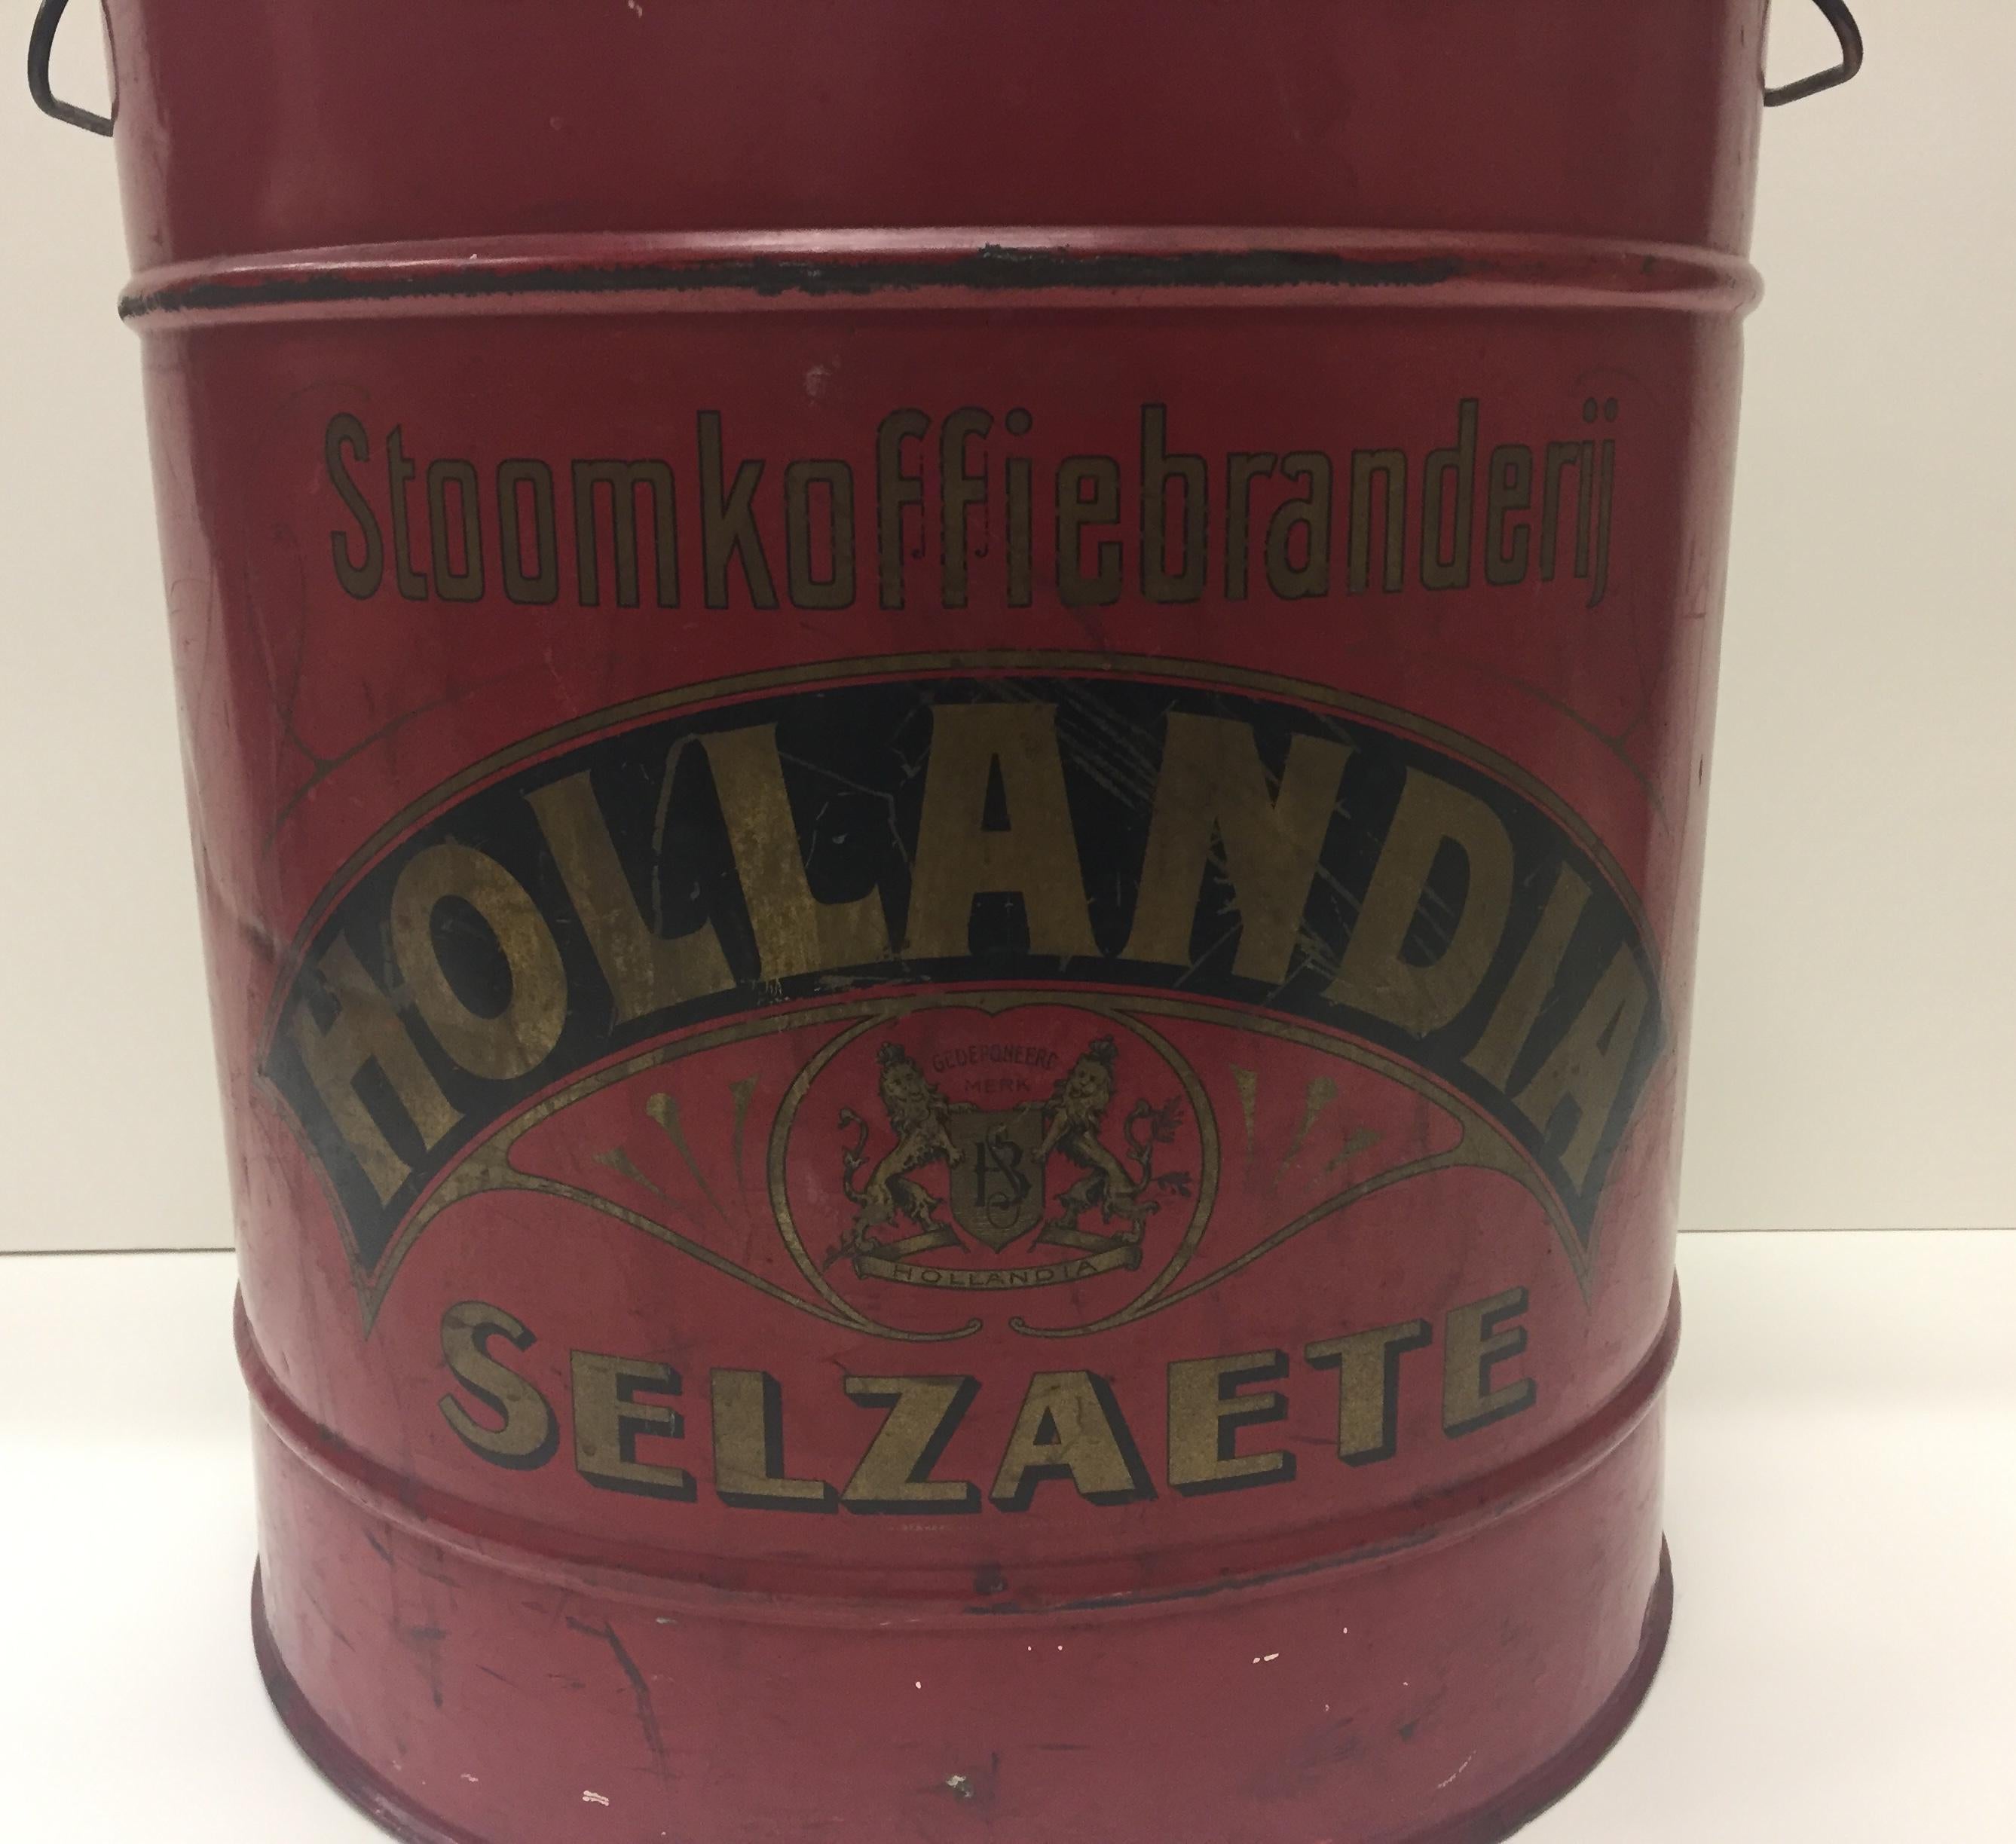 Fabulous vintage object that's an antique coffee tin with original cherry red paint and graphic lettering and a lid that opens and closes.
 